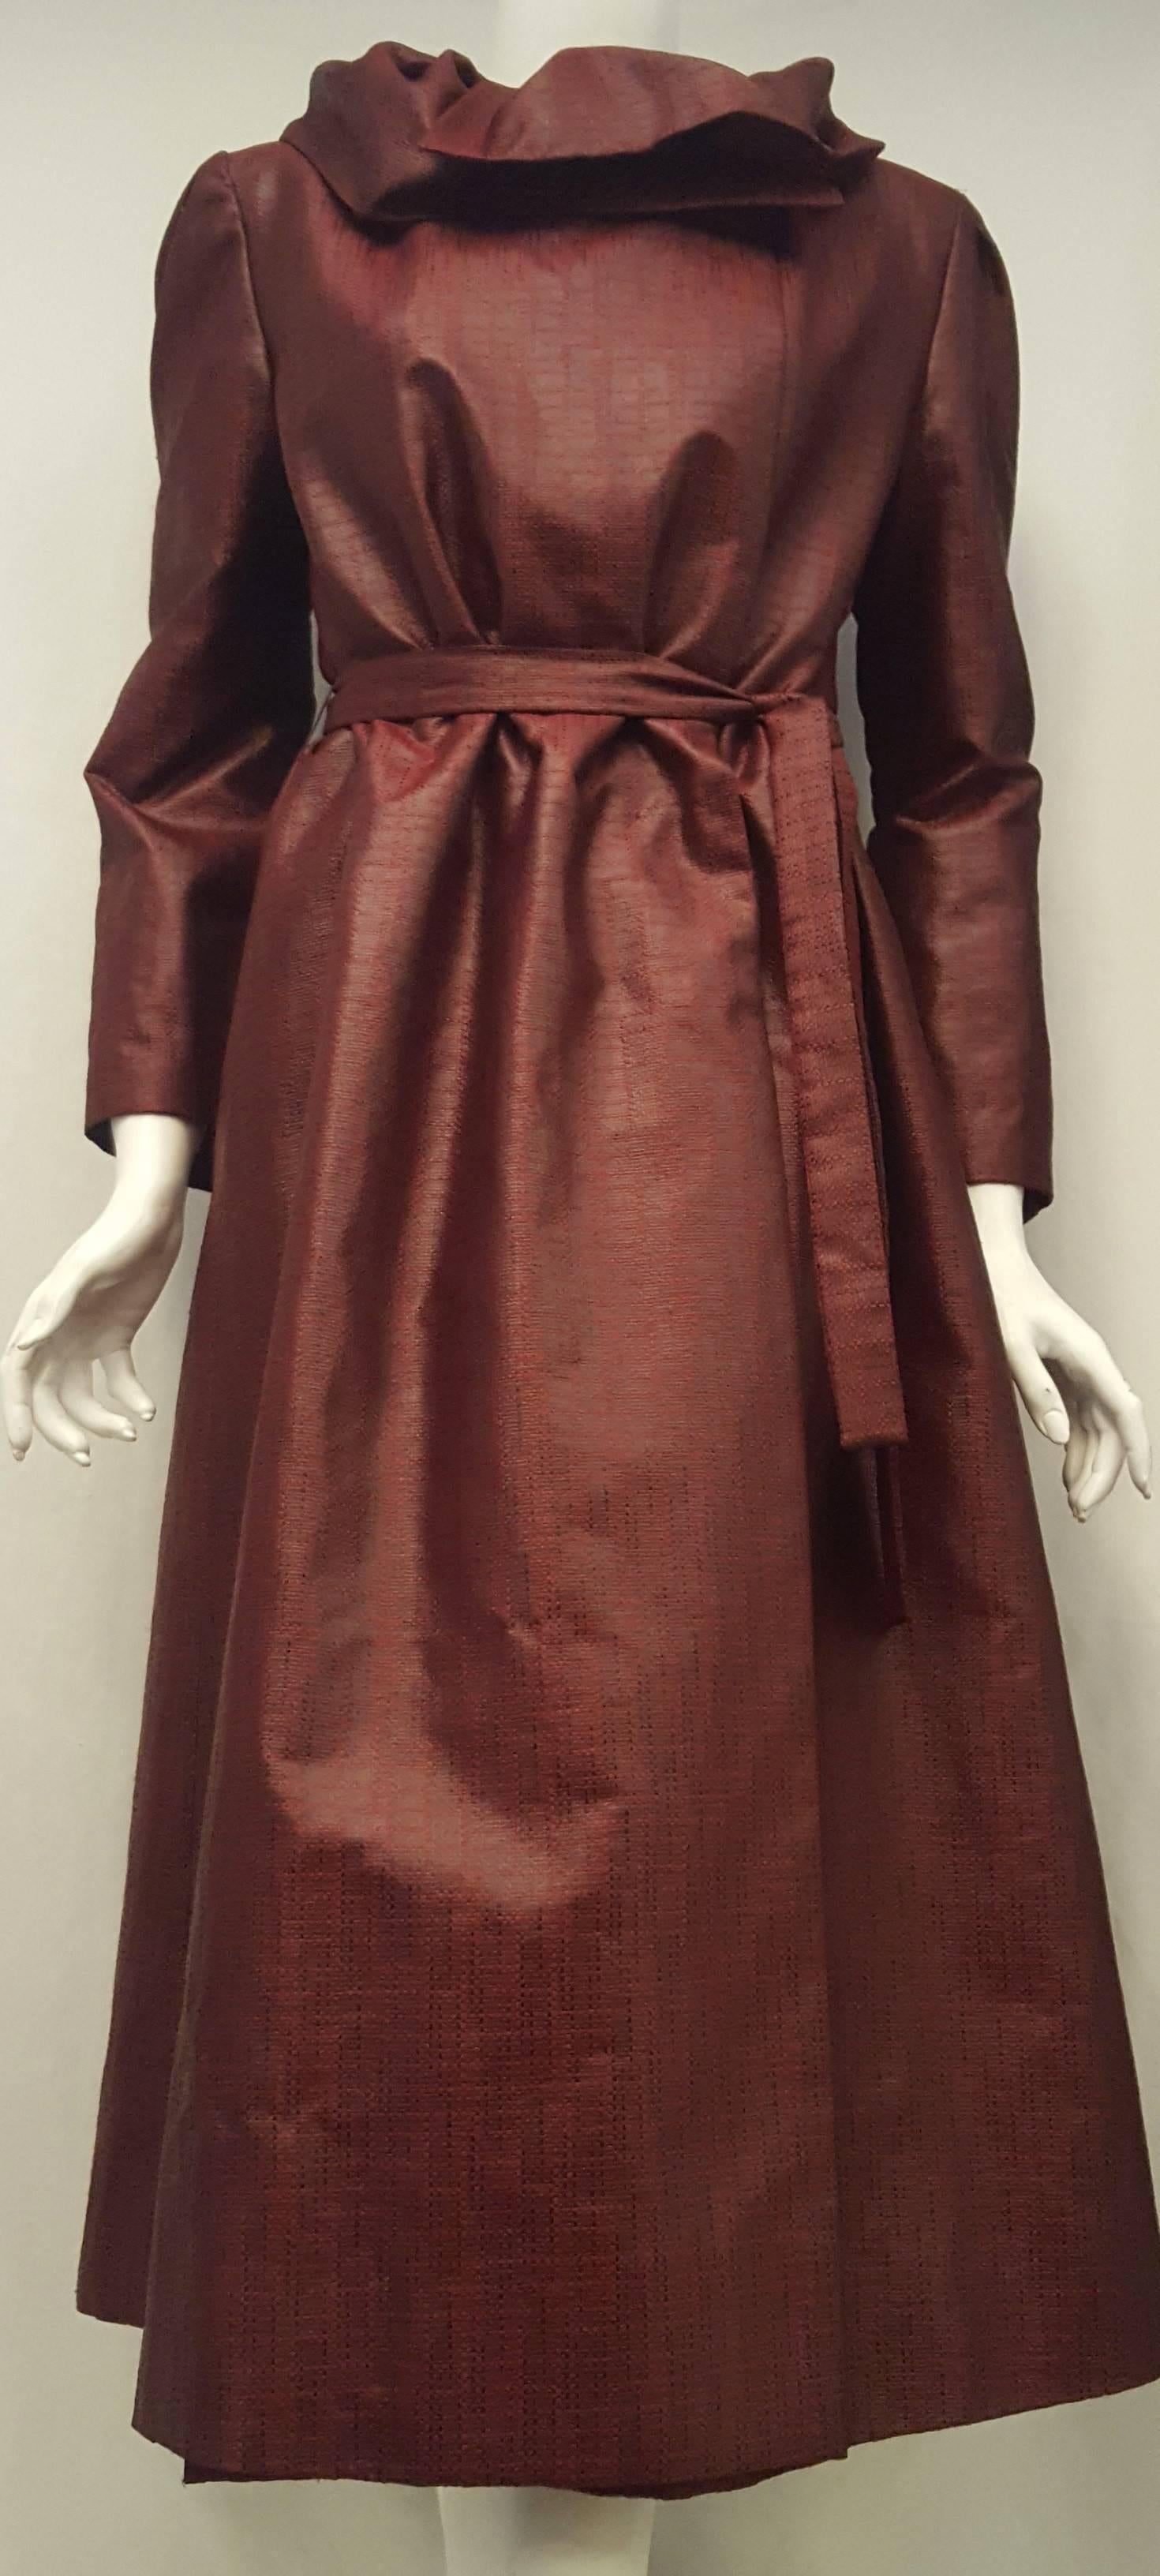 Black Pauline Trigere Burgundy Vintage Light Weather Coat with Convertible Collar For Sale